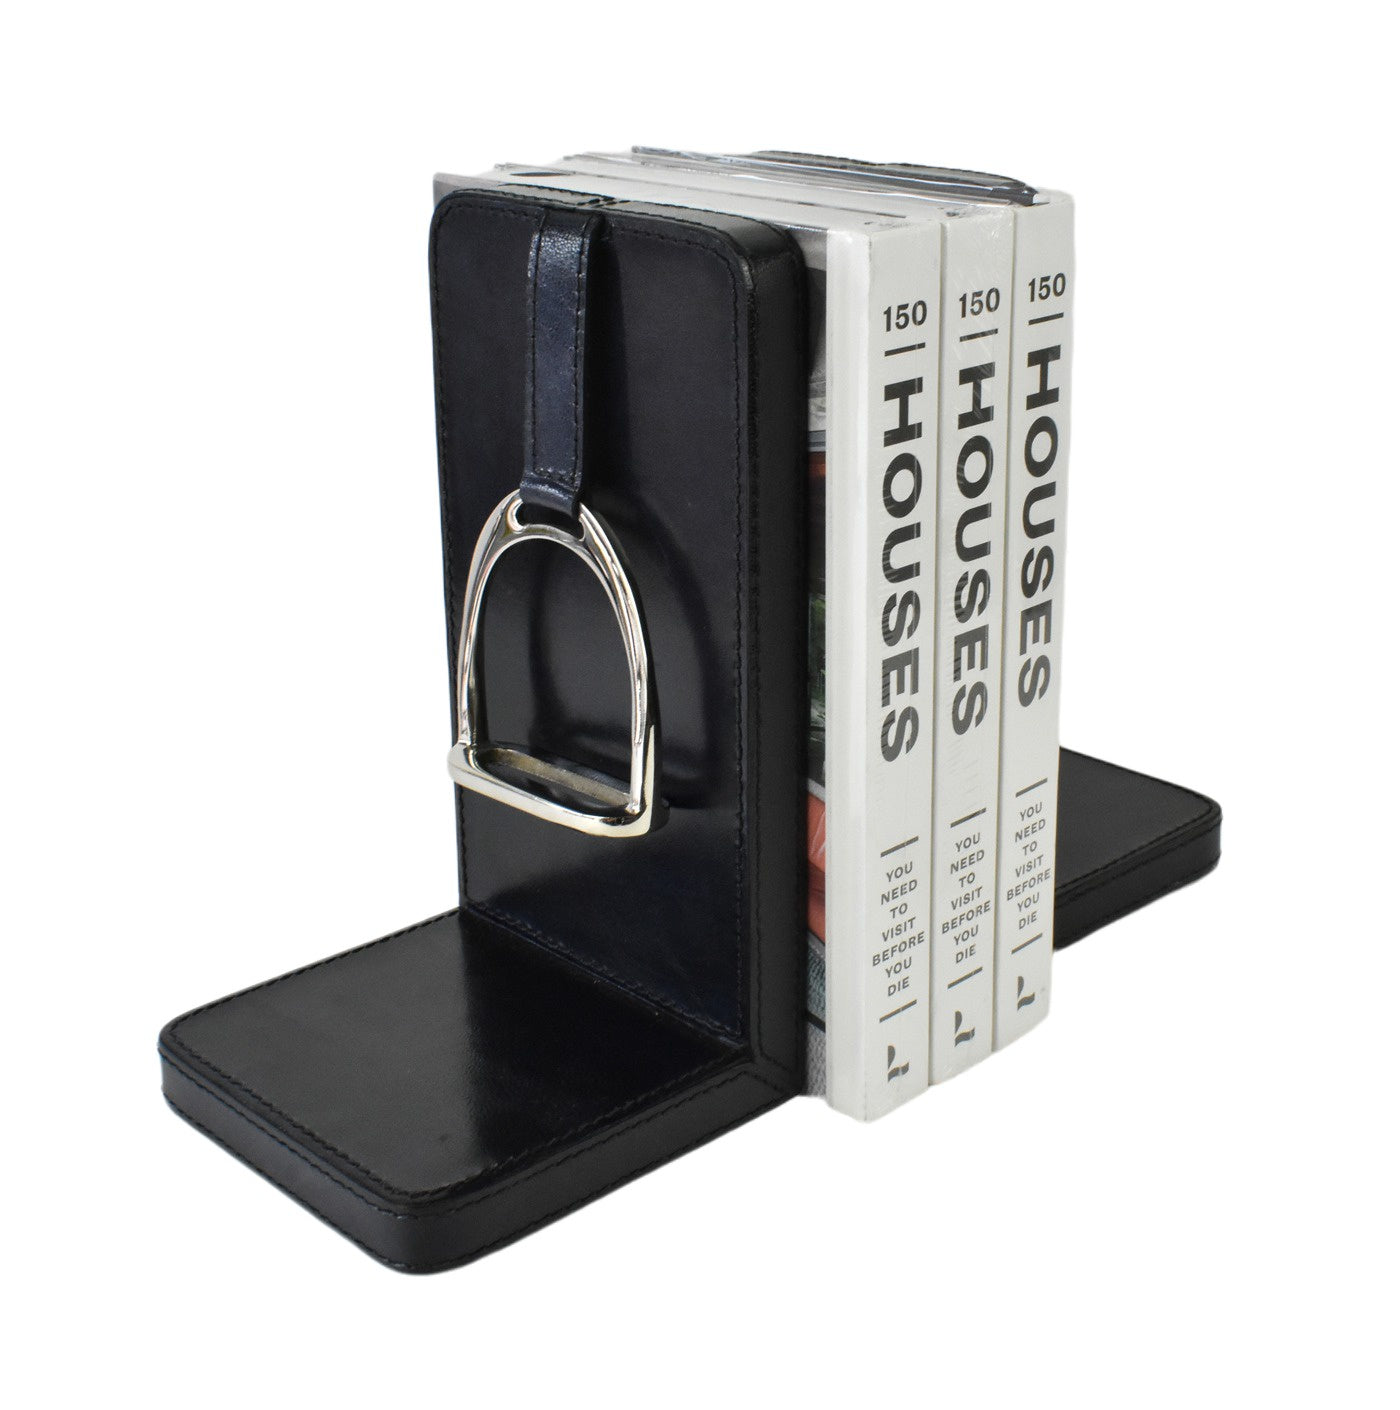 Navy Leather Stirrup Bookends